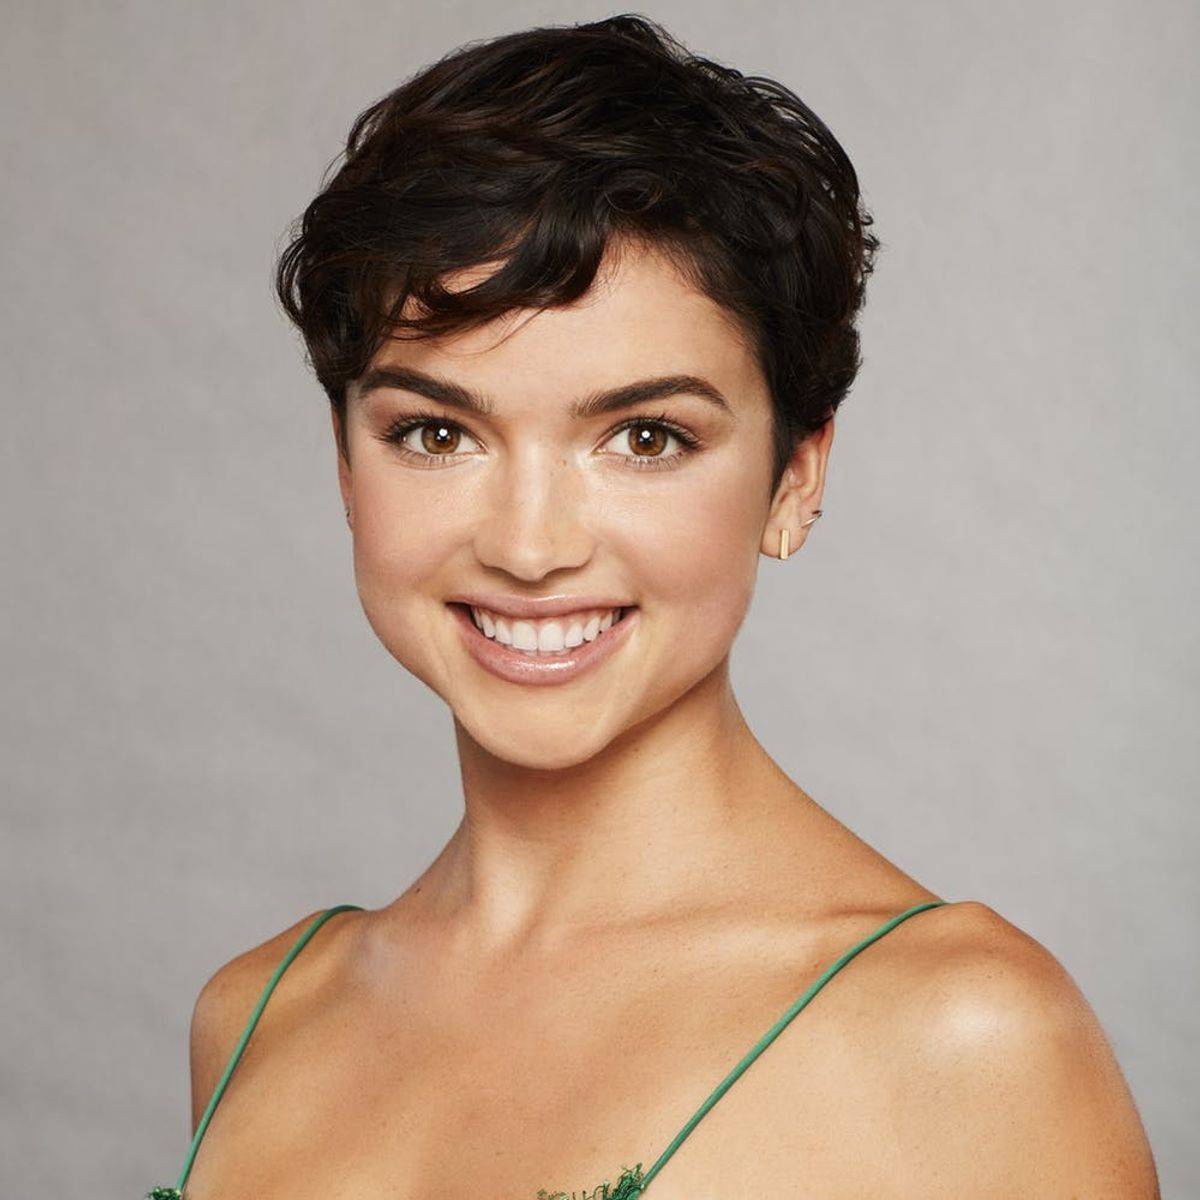 ‘Bachelor’ Contestant Bekah M. Tells the Real Story Behind Her Missing Person Mix-Up